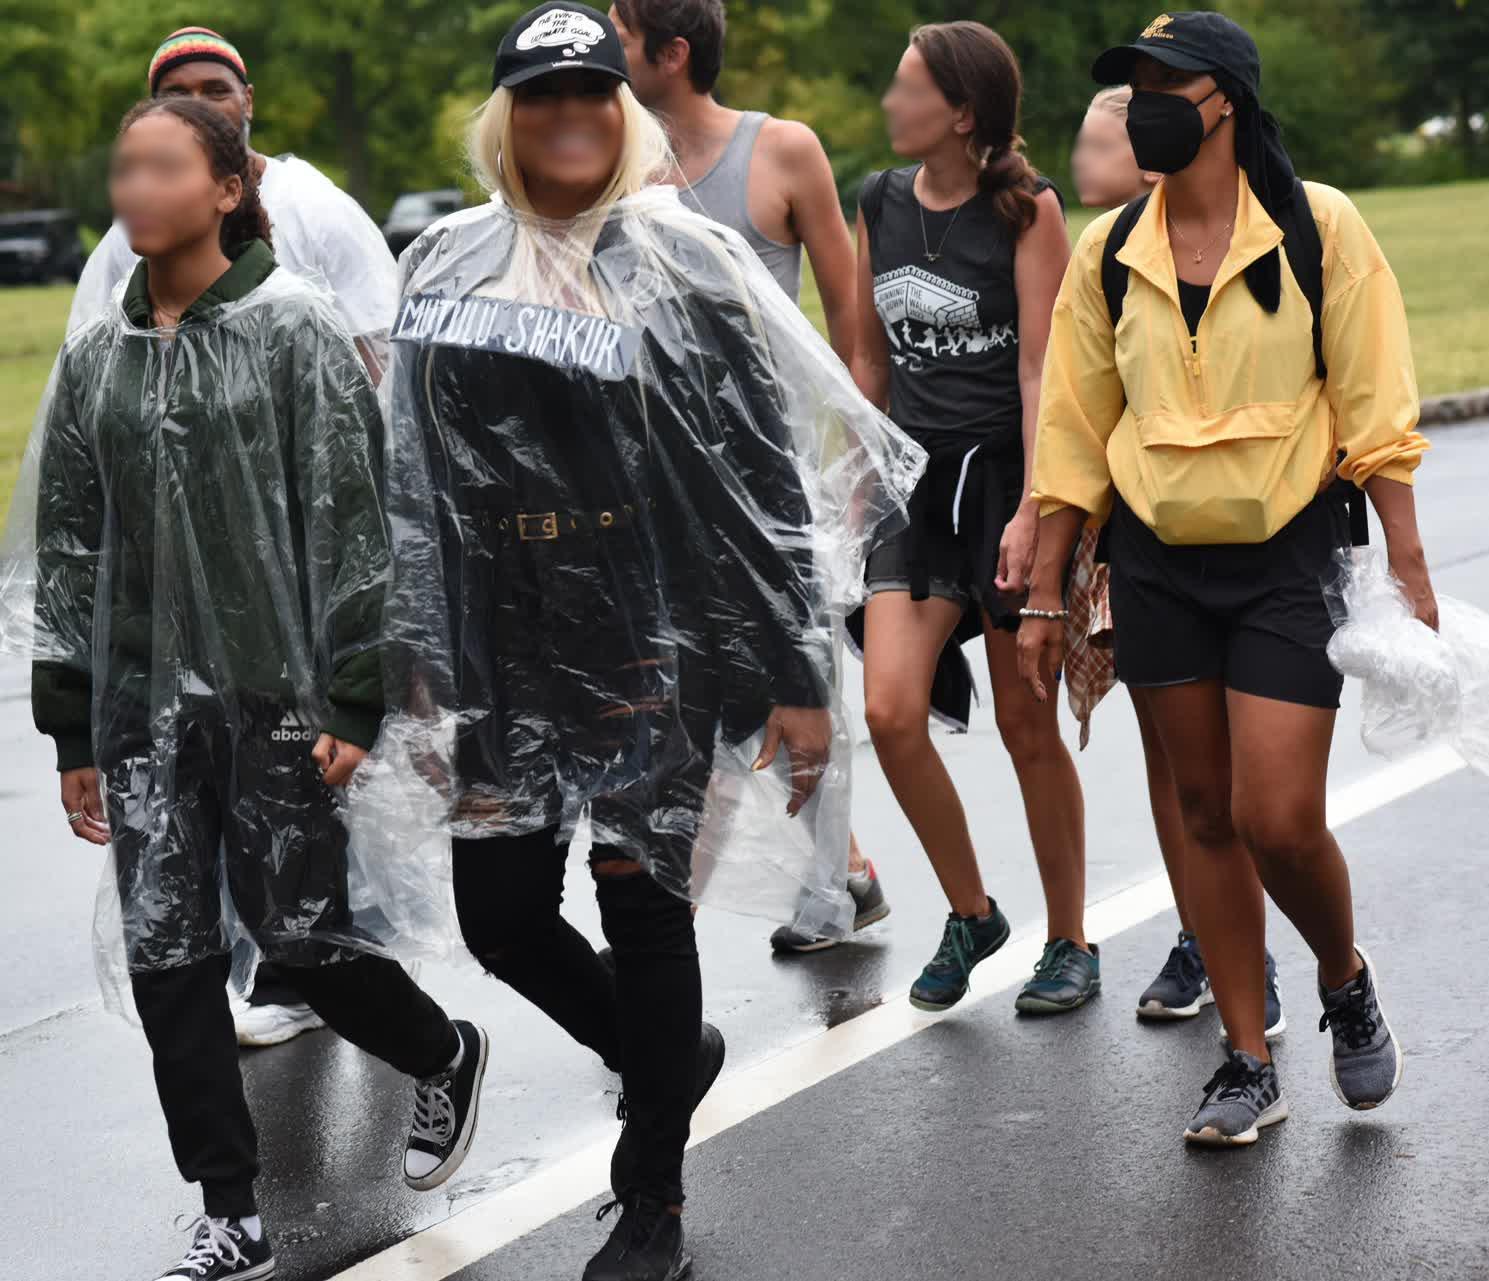 Group of seven people walking, some in rain jackets or ponchos, and others wearing just t-shirts and shorts.